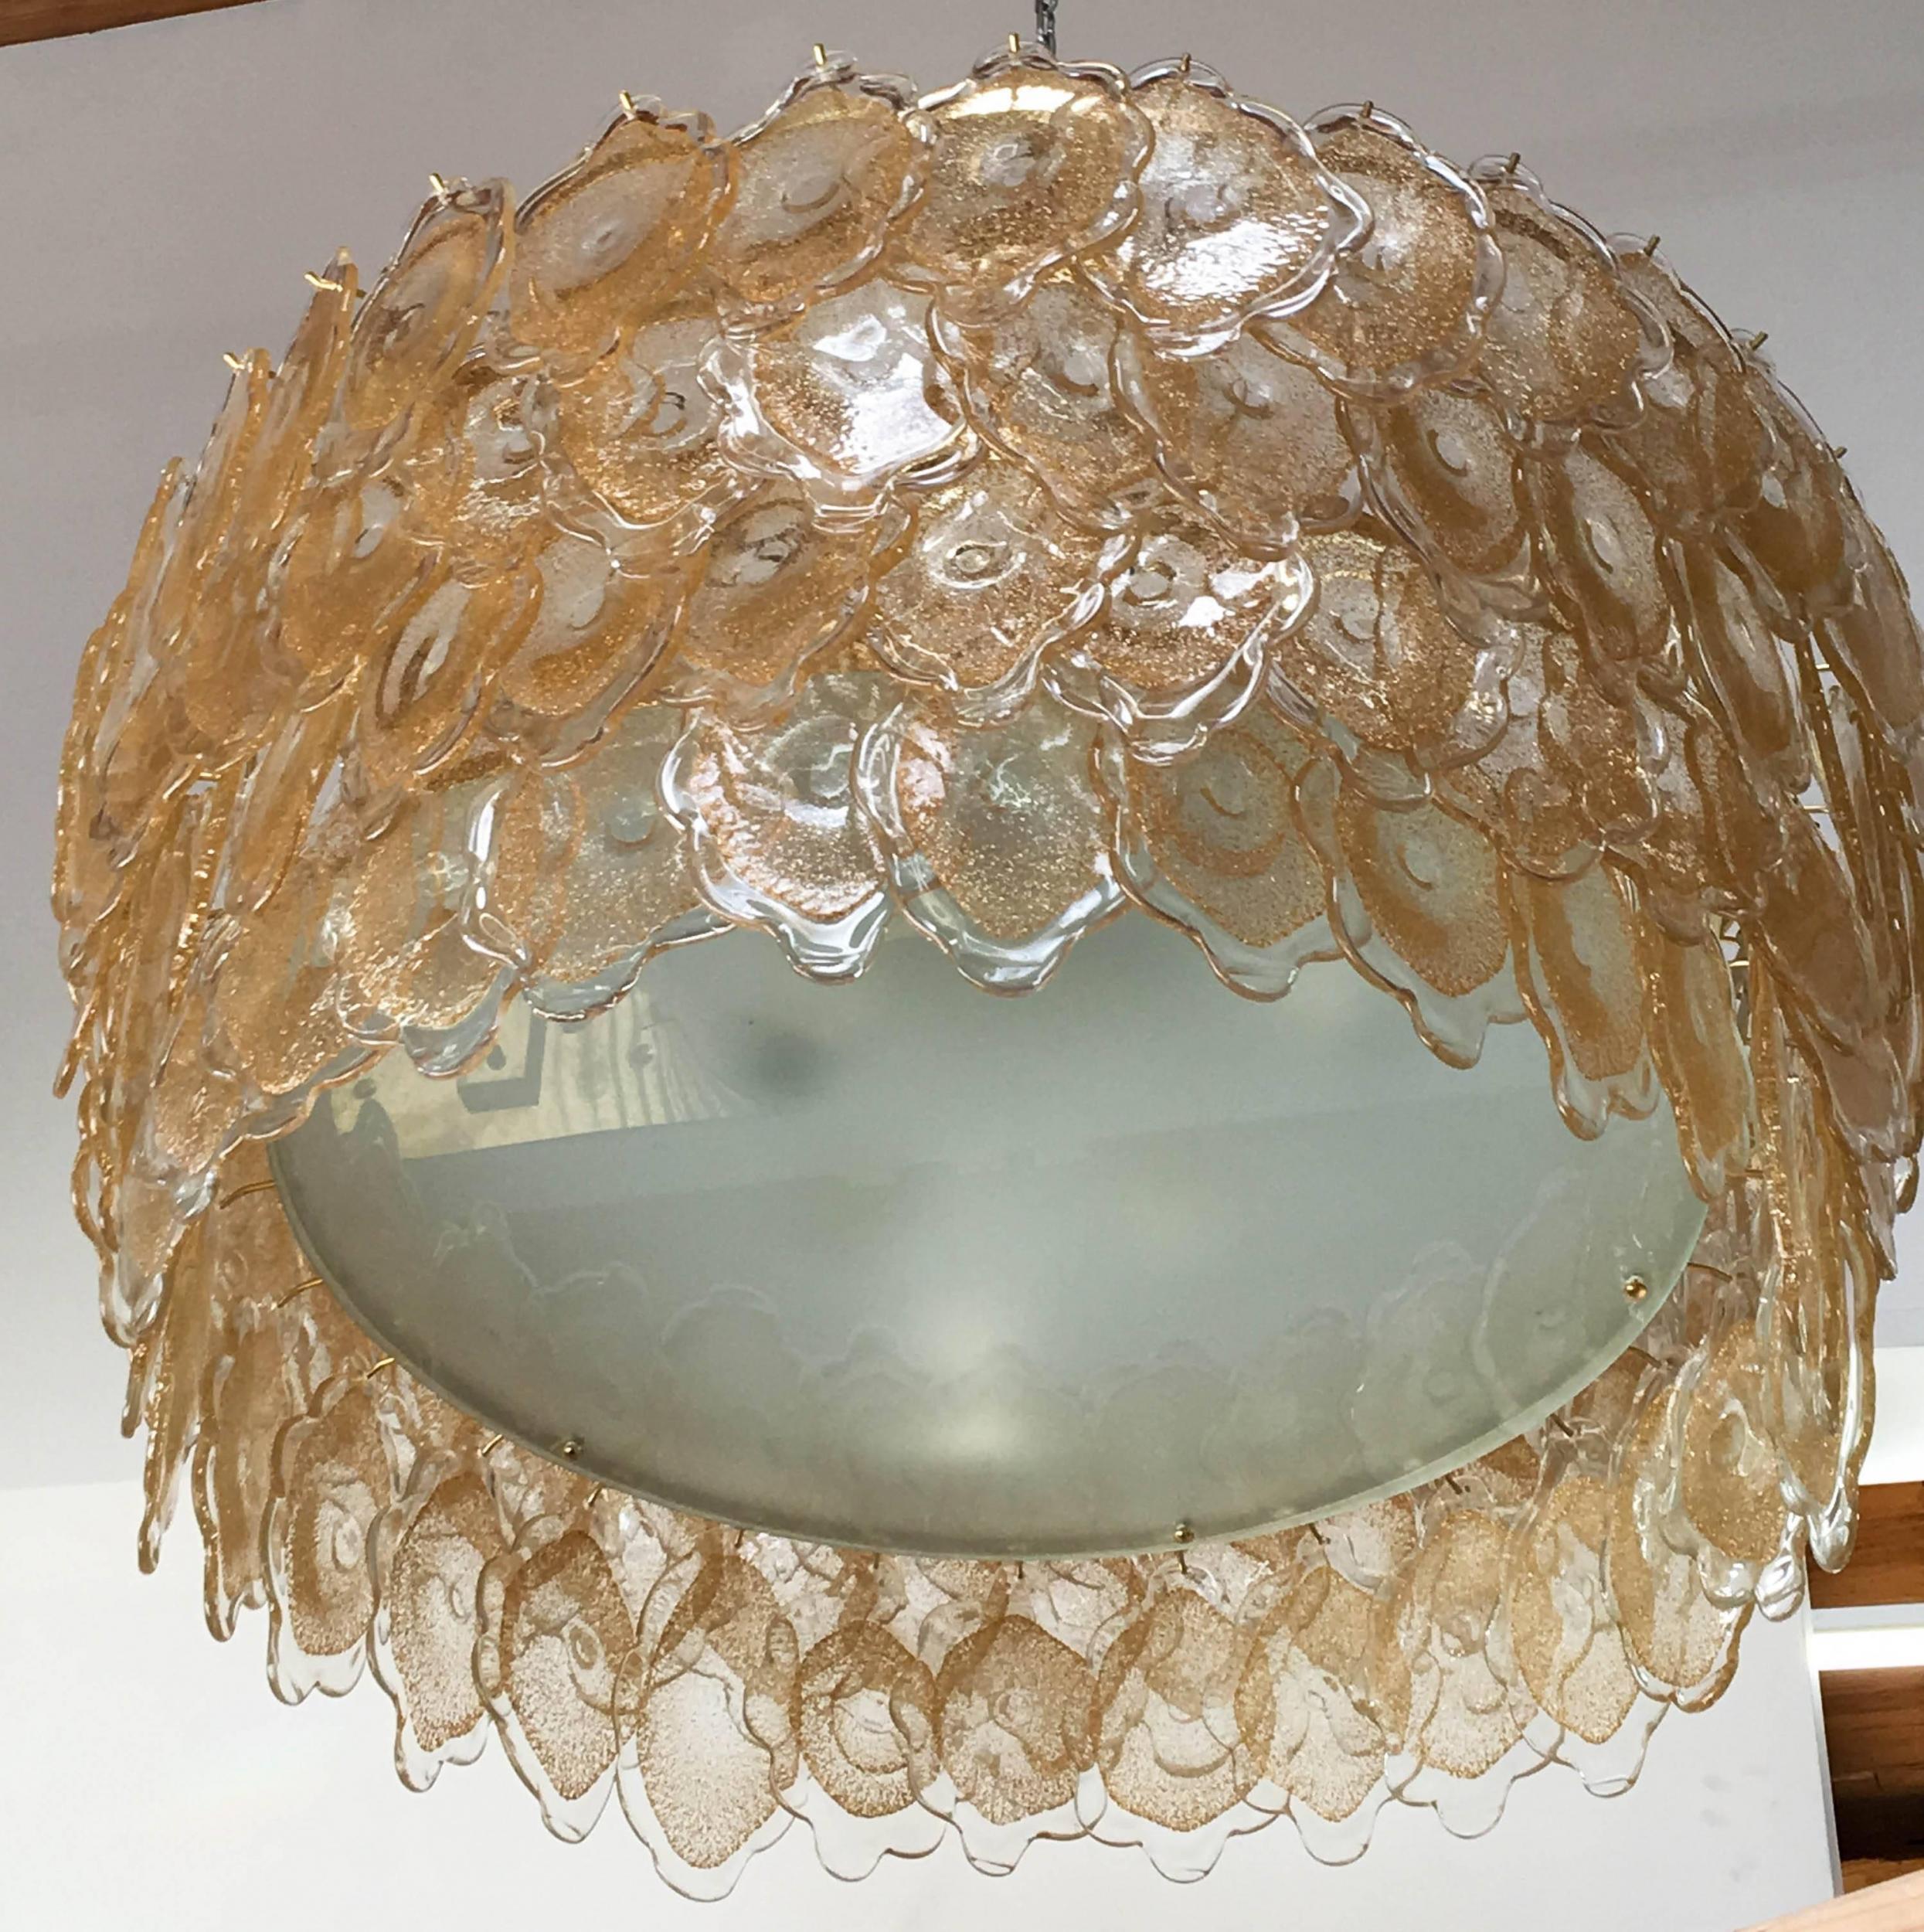 Vintage Italian chandelier with 128 uniquely hand blown 24-karat gold infused Murano glasses, mounted on a brass drum-shaped frame that creates a gold cloud effect, and frosted glass diffuser / Designed by Mazzega circa 1960s / Made in